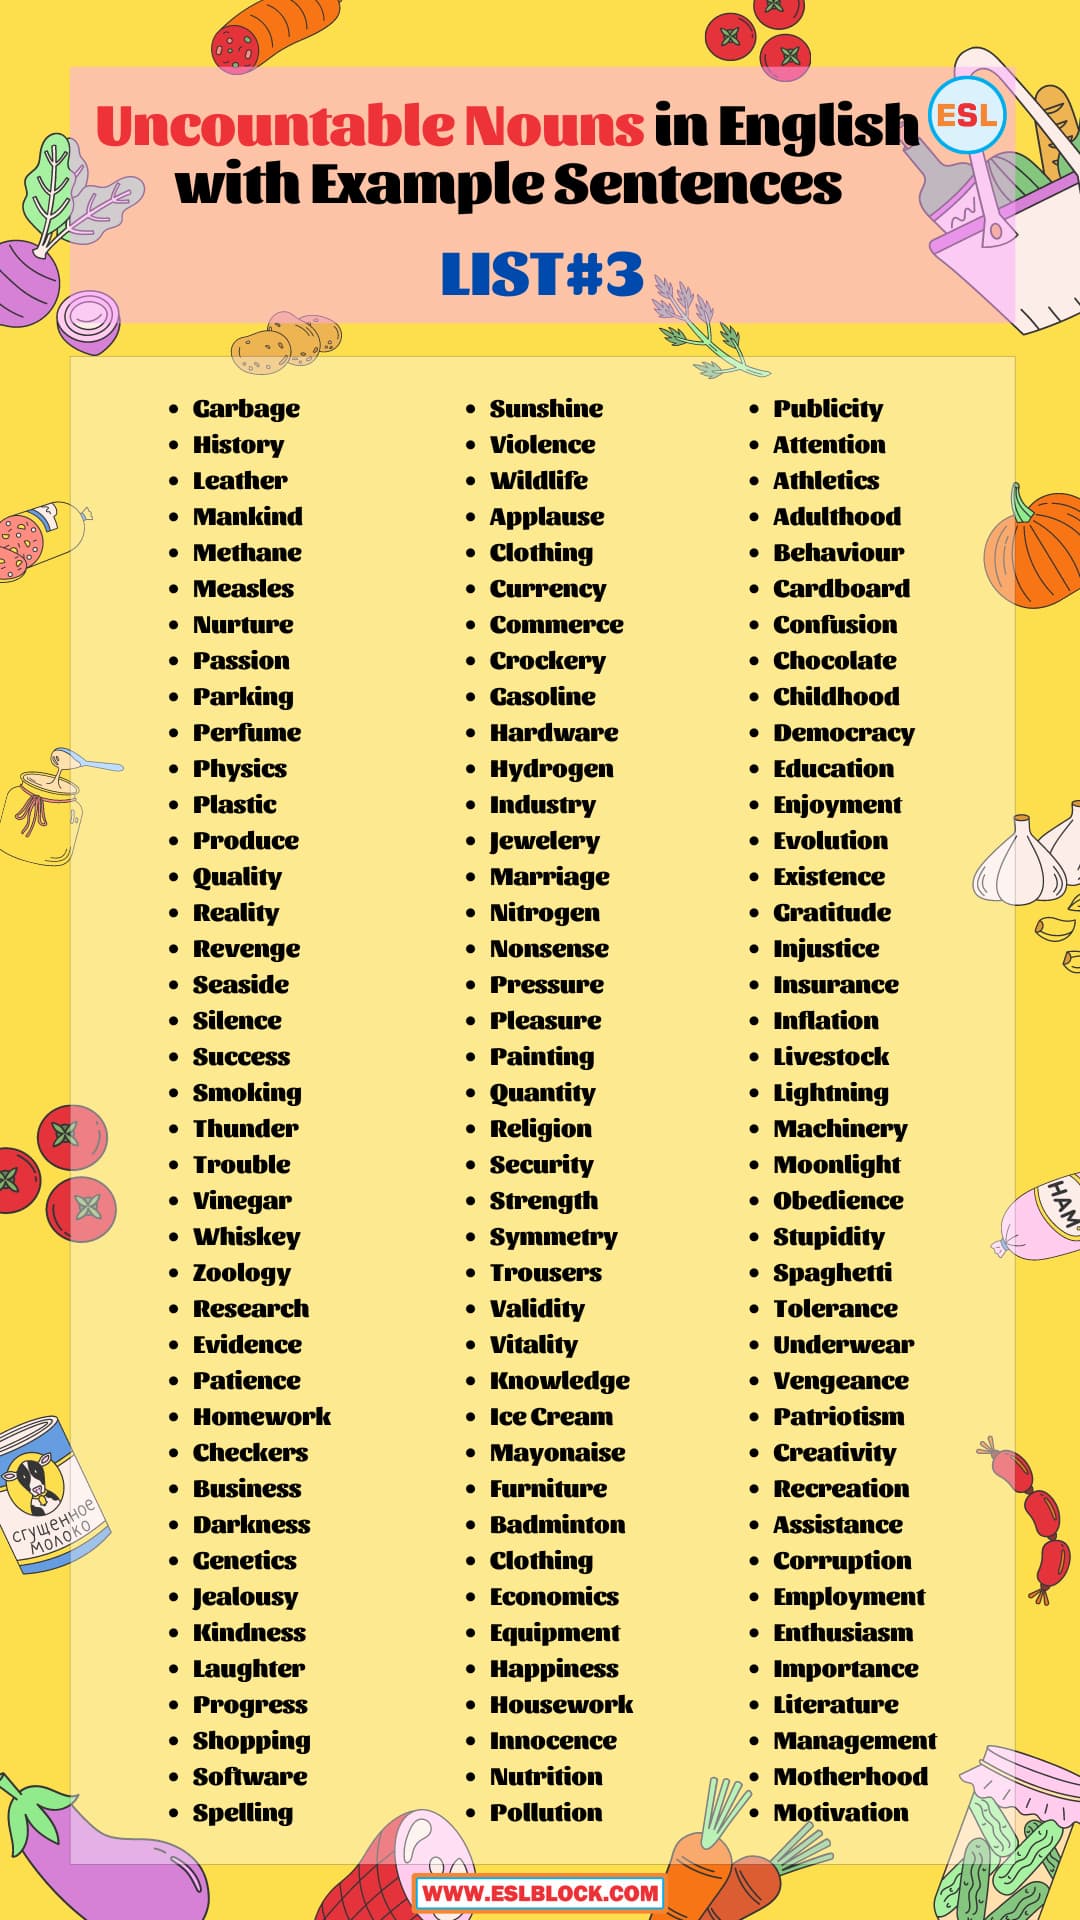 100 Example Sentences Using Uncountable, All Uncountable nouns, List of Uncountable nouns, Types of Nouns, Types of Nouns with Example Sentences, Uncountable Nouns, Uncountable nouns list, Uncountable Nouns Vocabulary, Uncountable Nouns with Example Sentences, What are Concrete Nouns, What are Nouns, What are the types of Nouns, What is a Noun